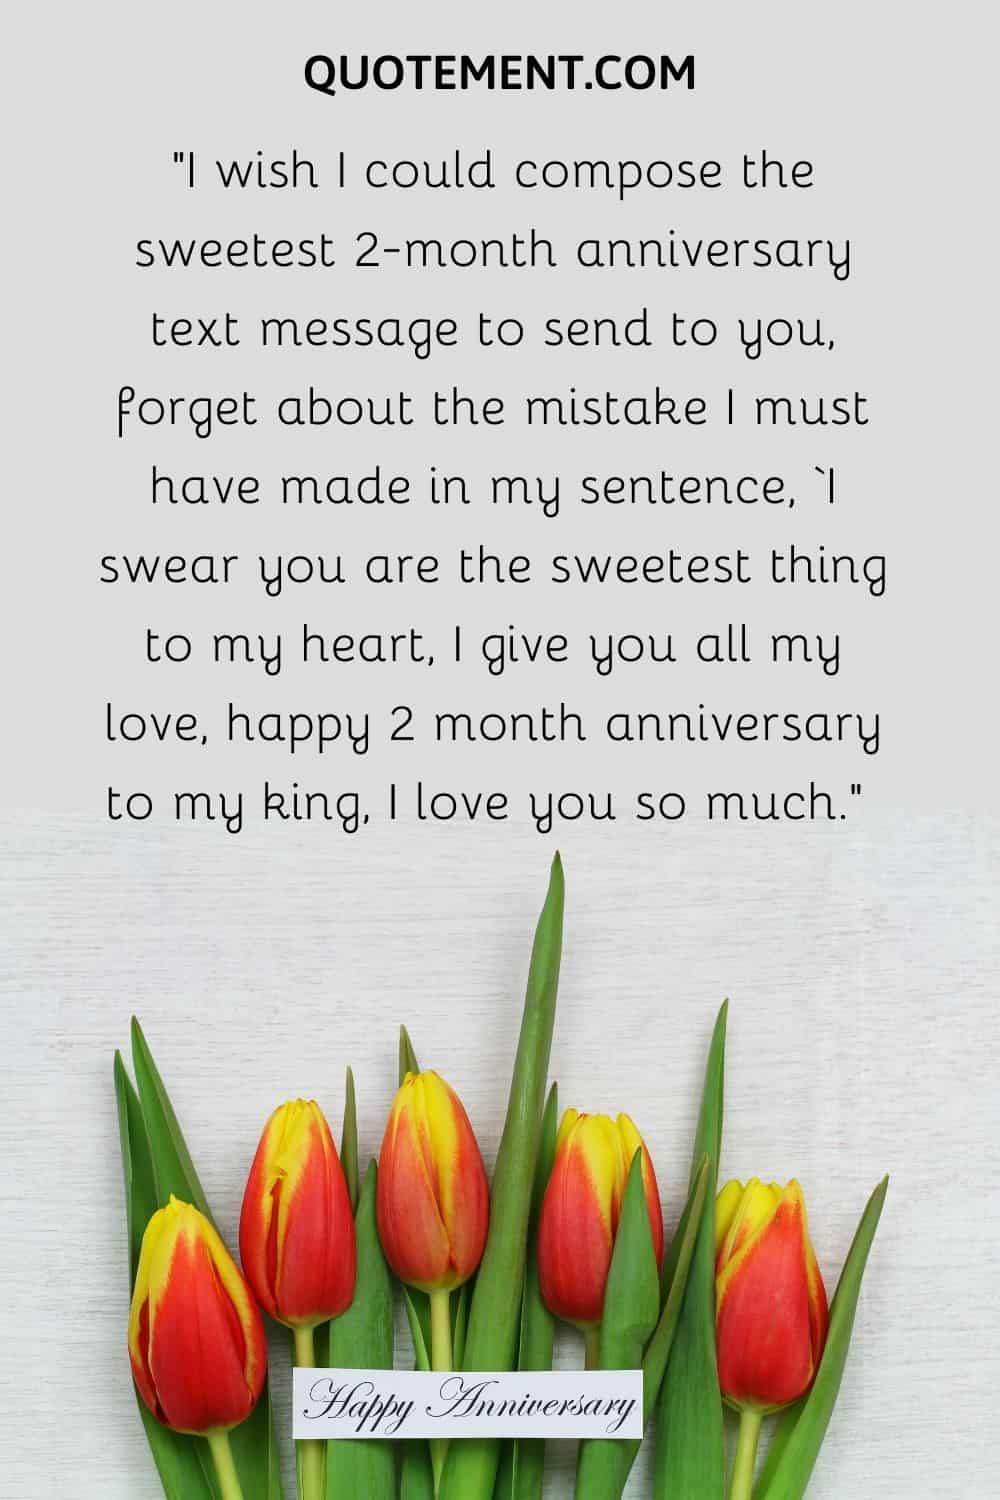 “I wish I could compose the sweetest 2-month anniversary text message to send to you,